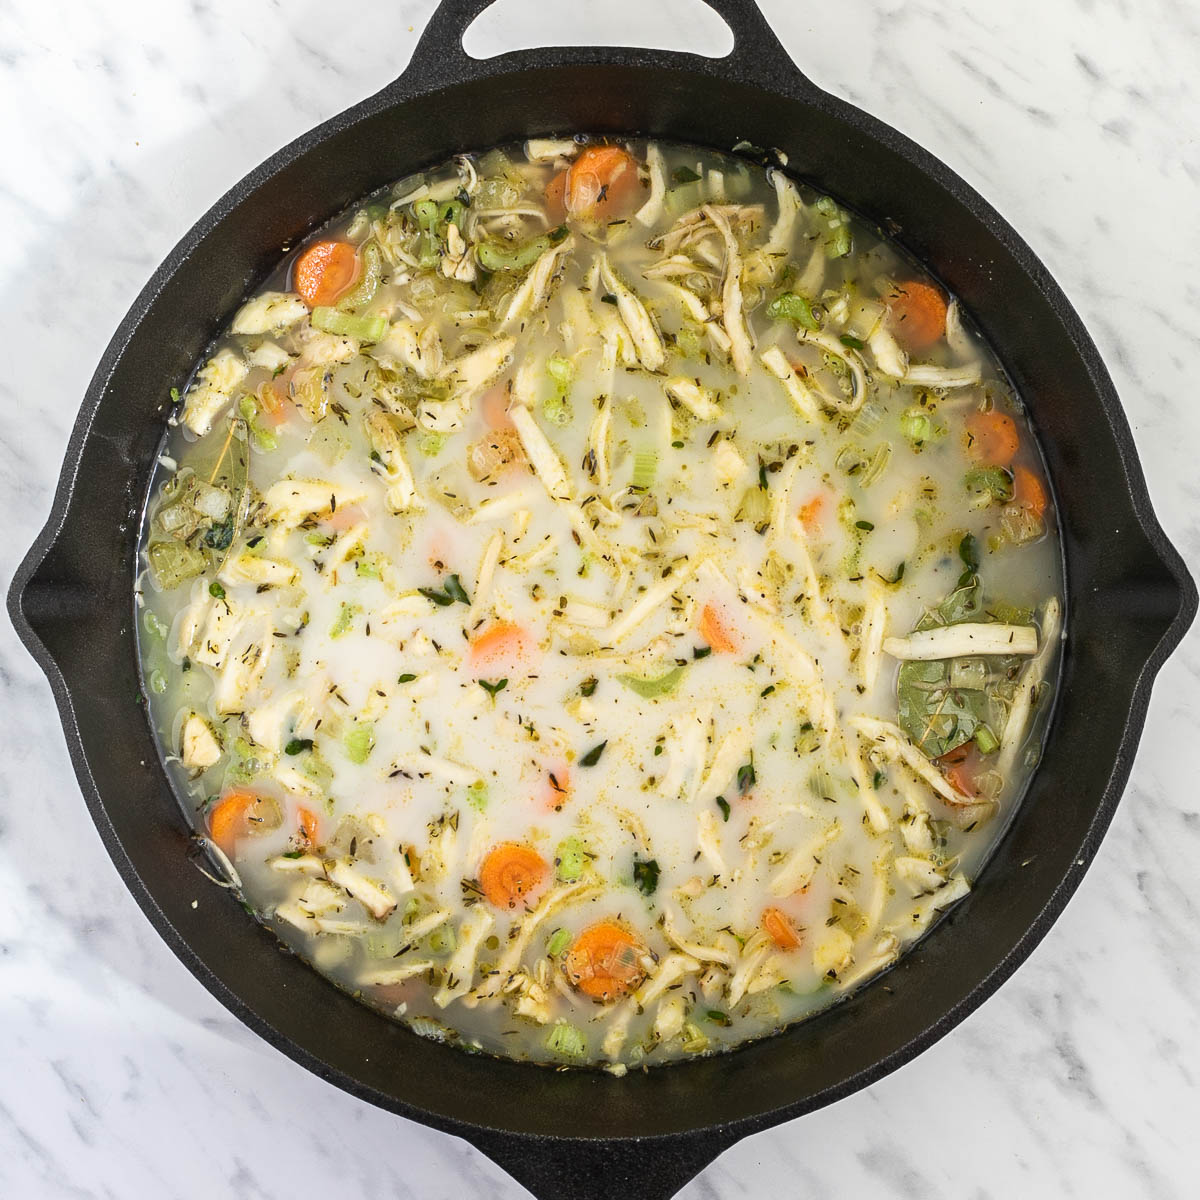 Cast iron skillet with light broth-like liquid with sliced carrots, chopped onion, garlic, celery, shredded king oyster mushrooms, bay leaves, and thyme.